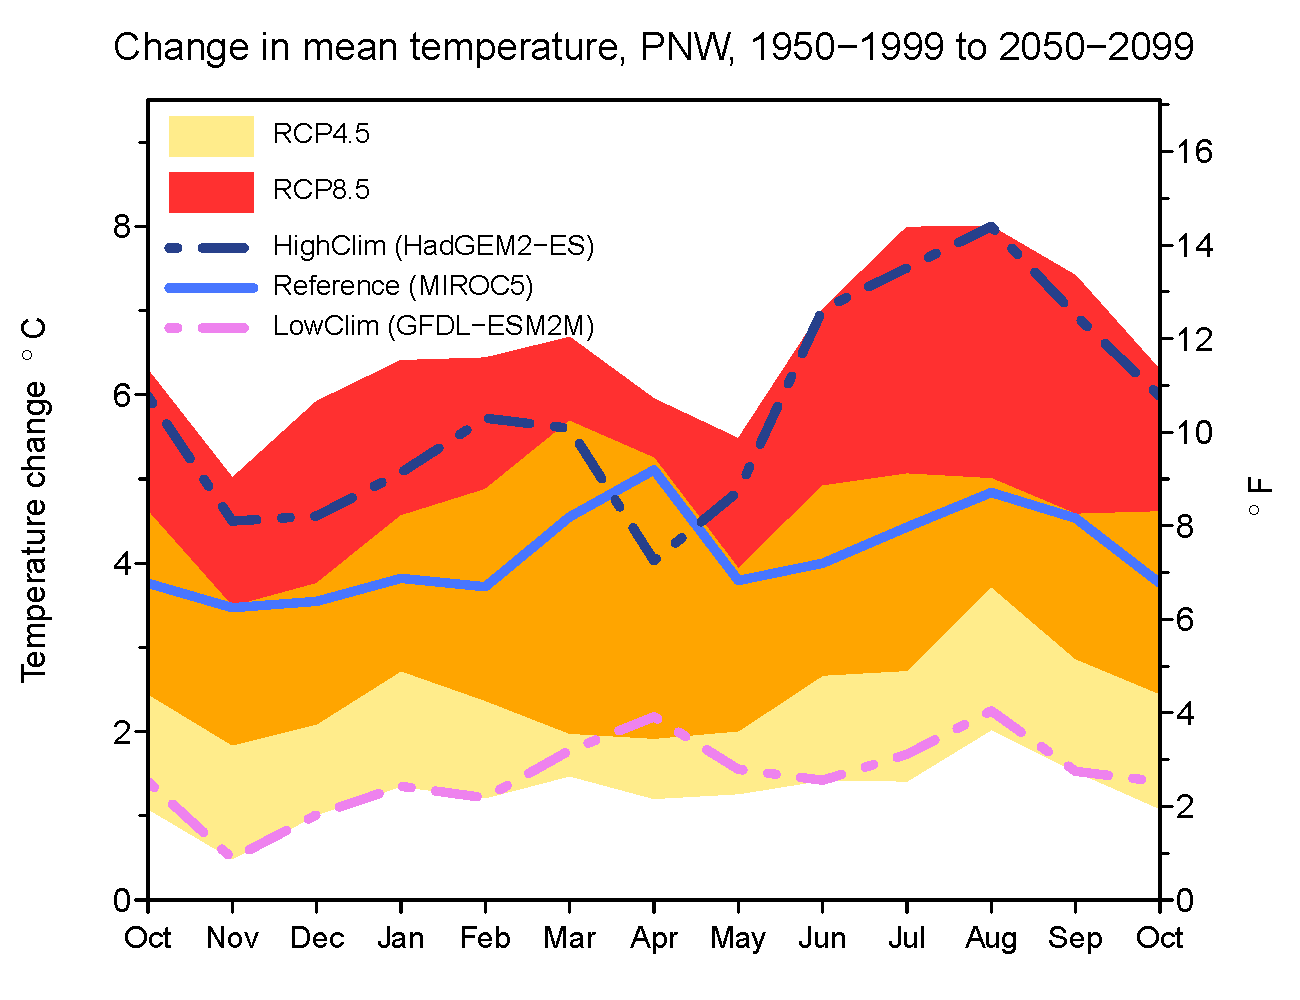 Changes in mean temperature by month for the period 2050-2099 from the historical period 1950-1999 for the Willamette River basin